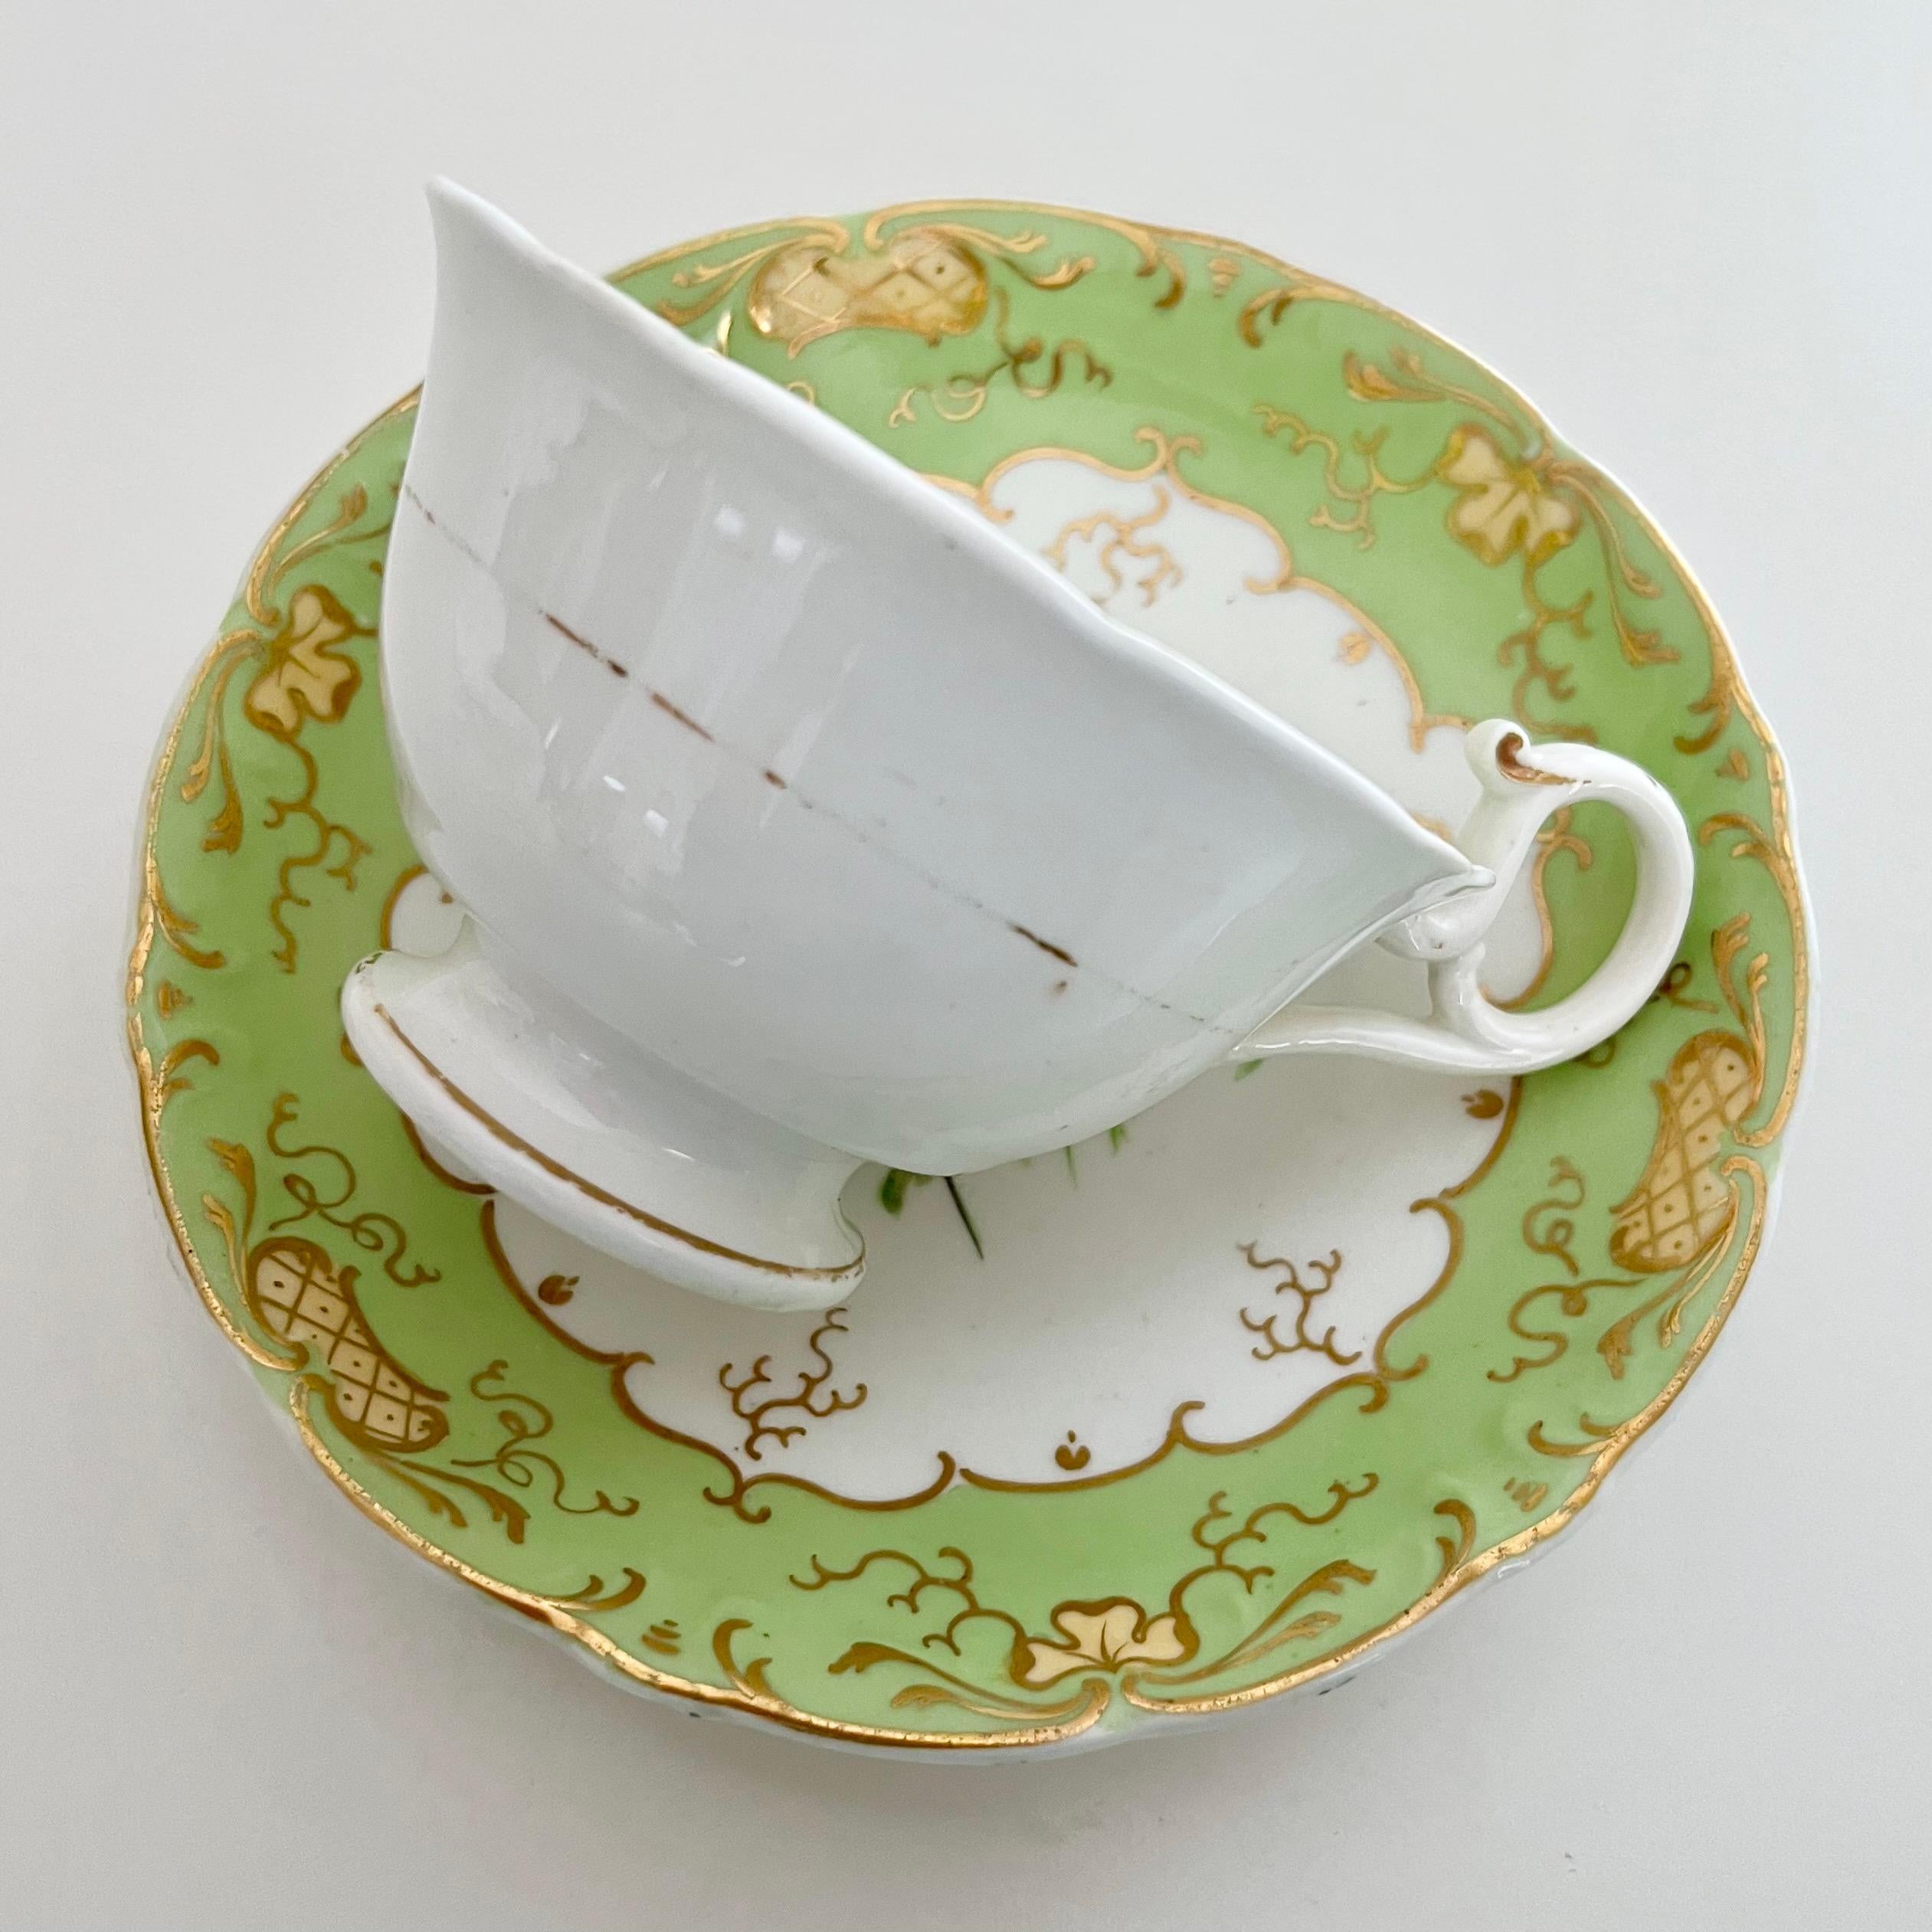 H & R Daniel Porcelain Teacup, Apple Green with Pink Roses, Rococo Revival C1840 8